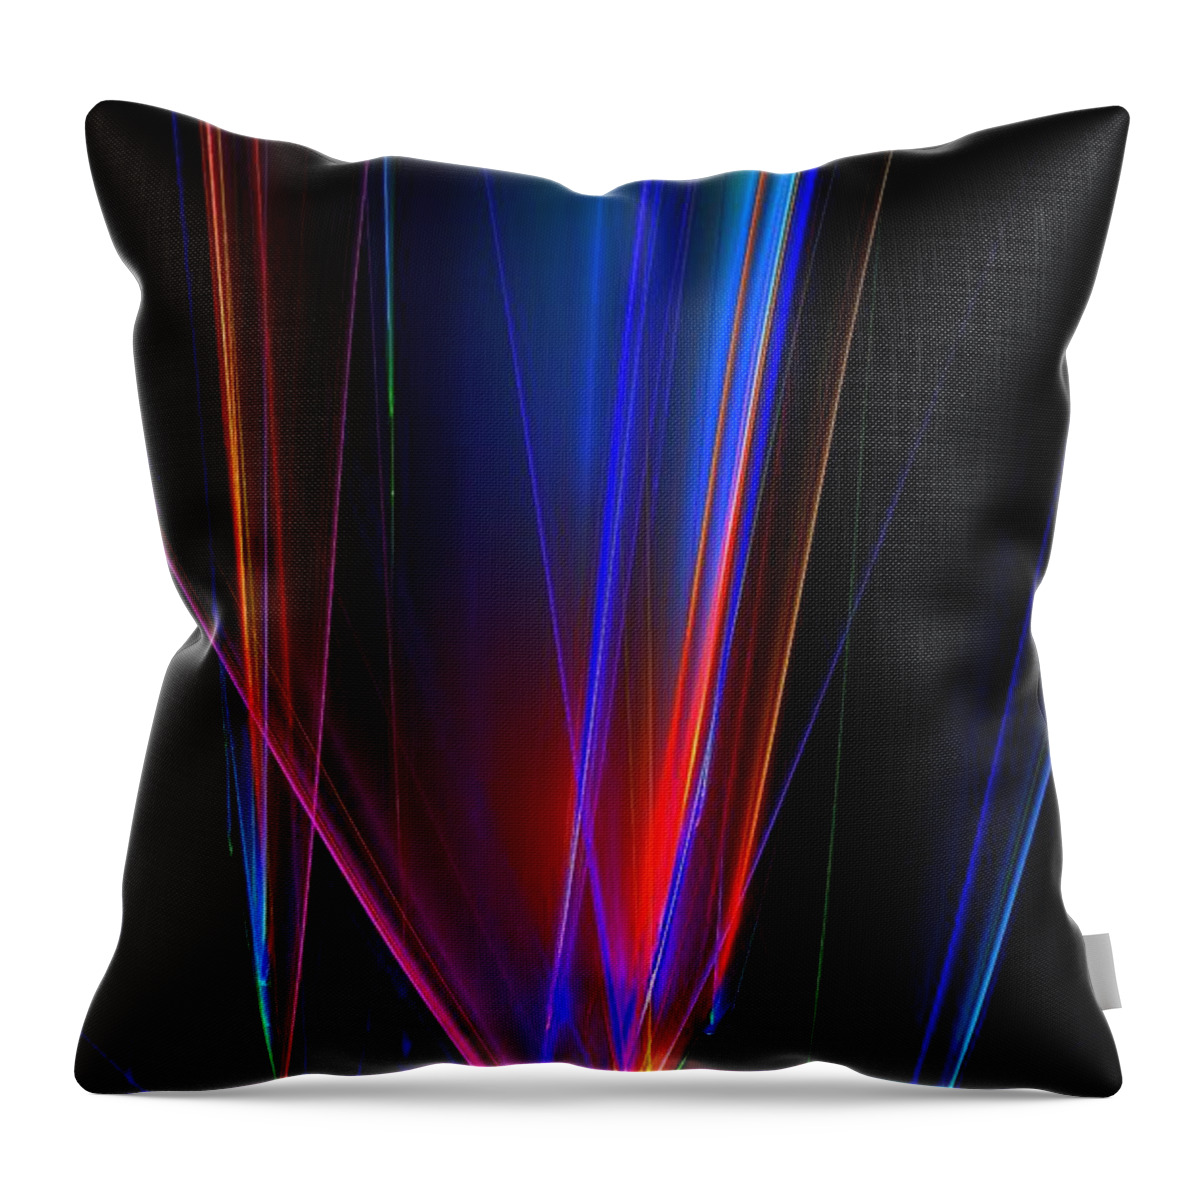 Home Throw Pillow featuring the digital art Prisims P by Greg Moores